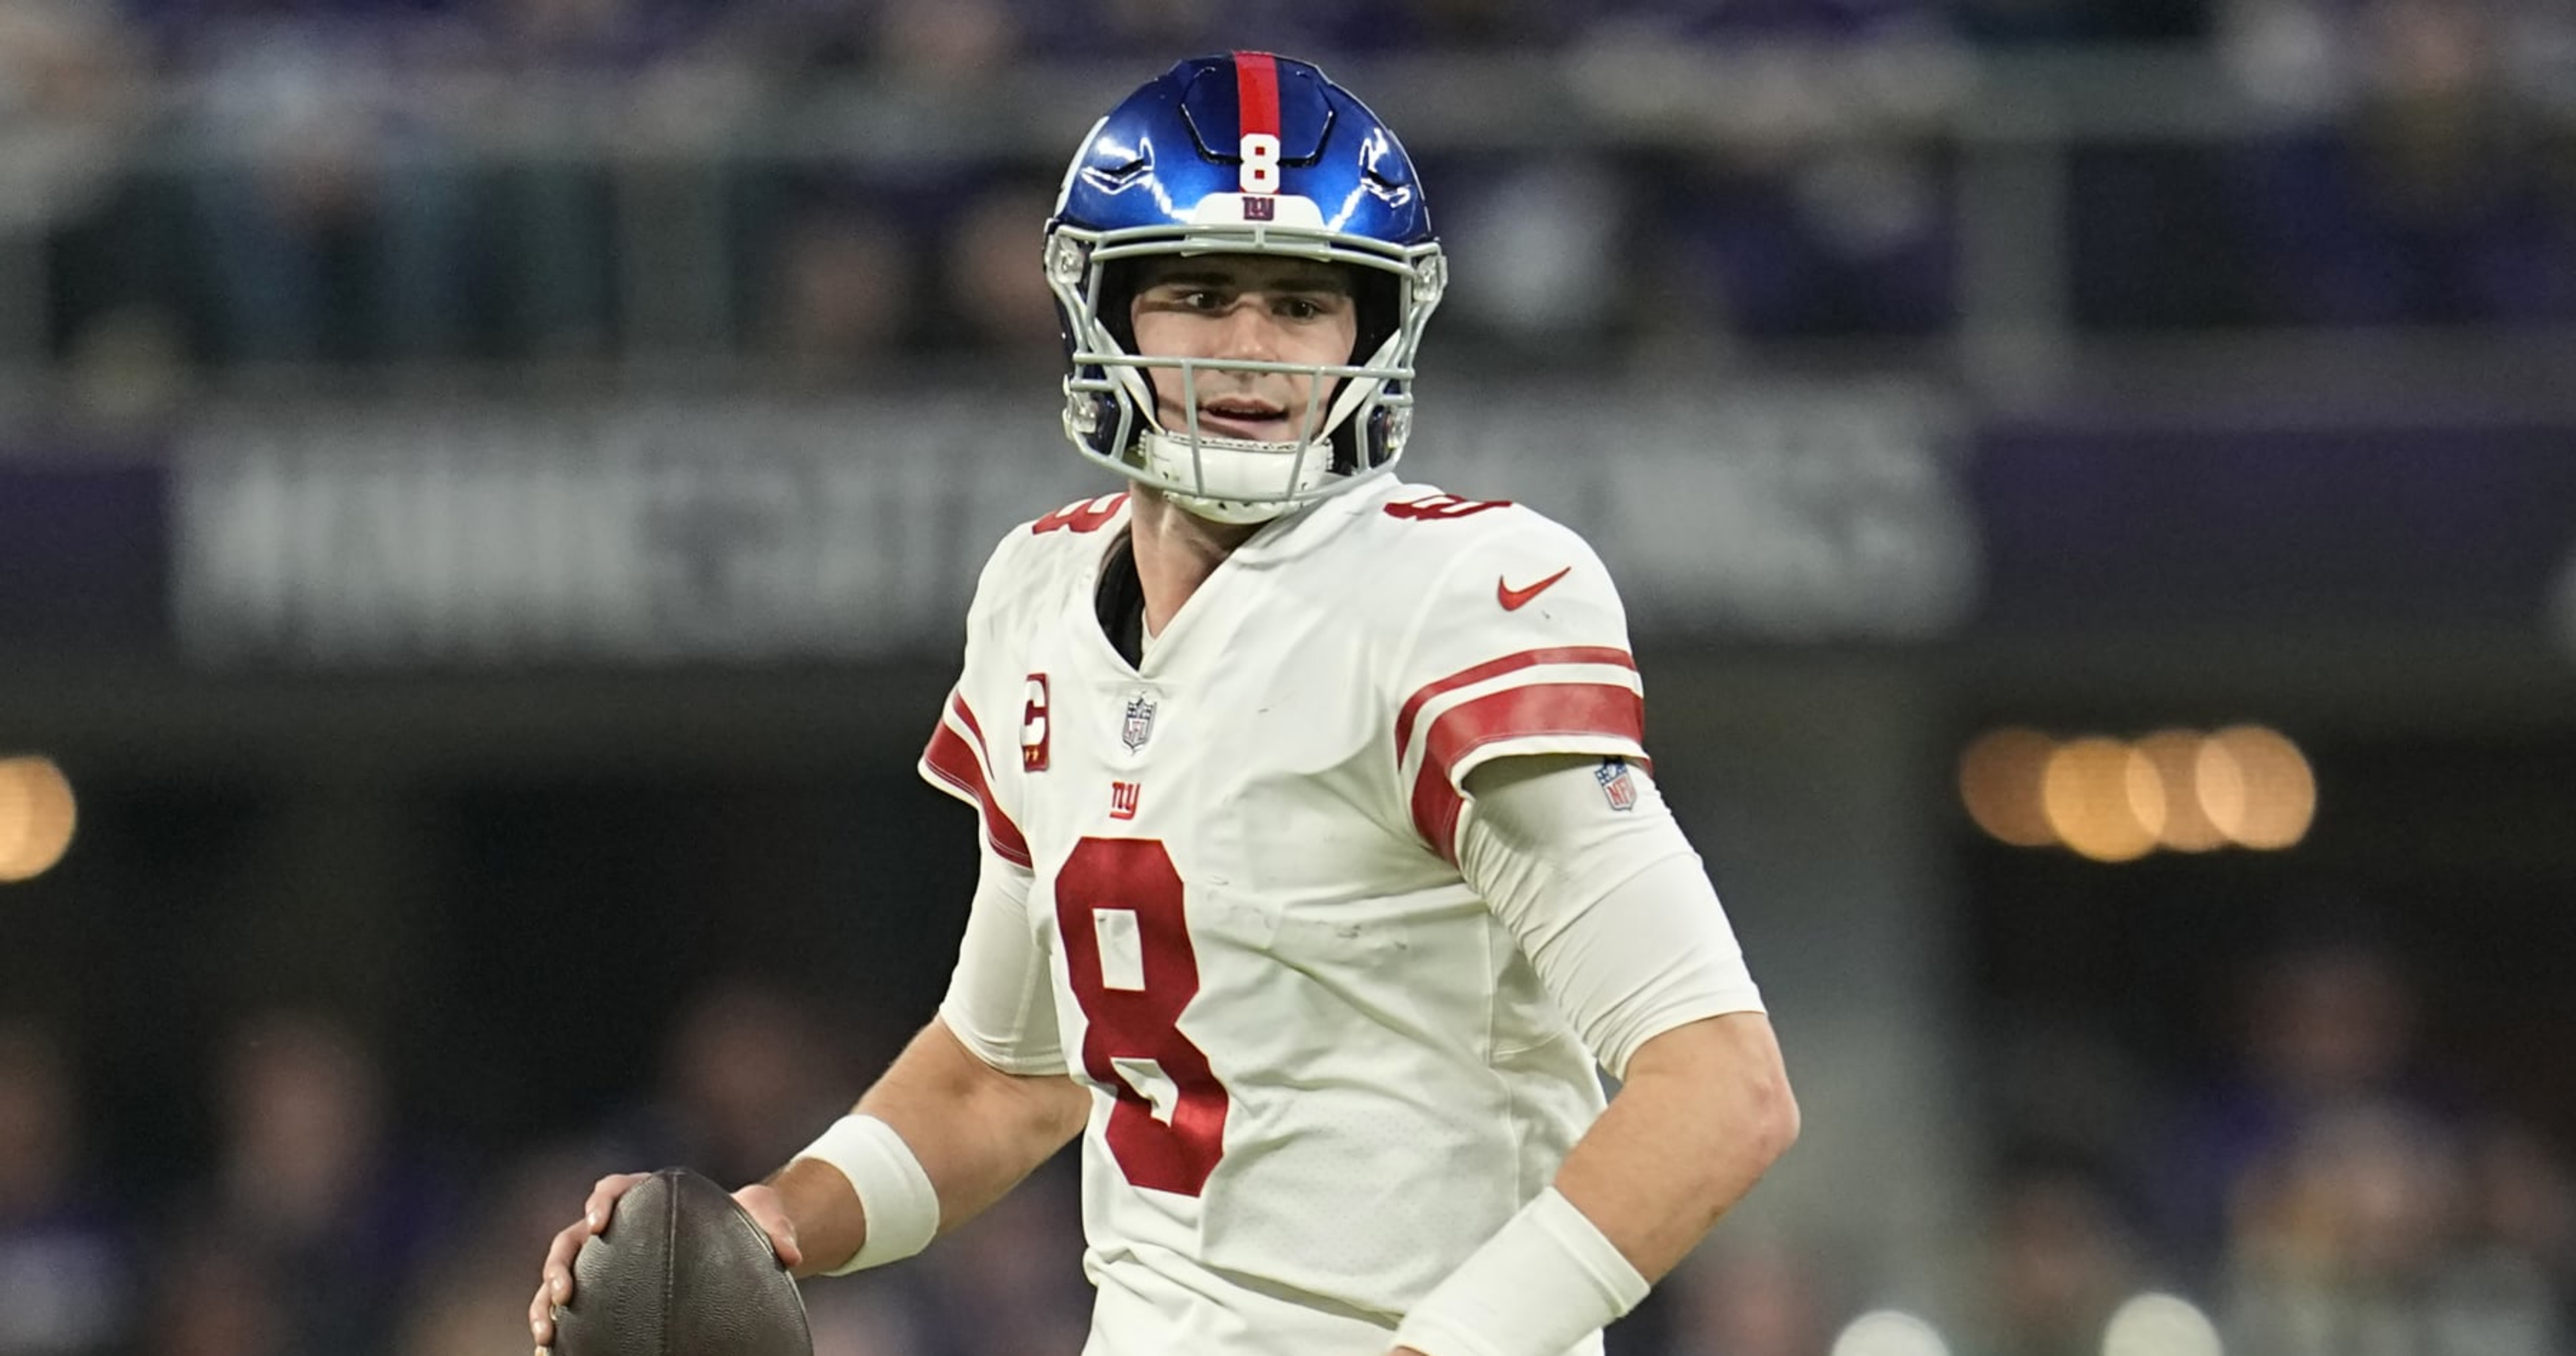 NFL draft 2019: Giants' Daniel Jones could sit for 3 years, GM says